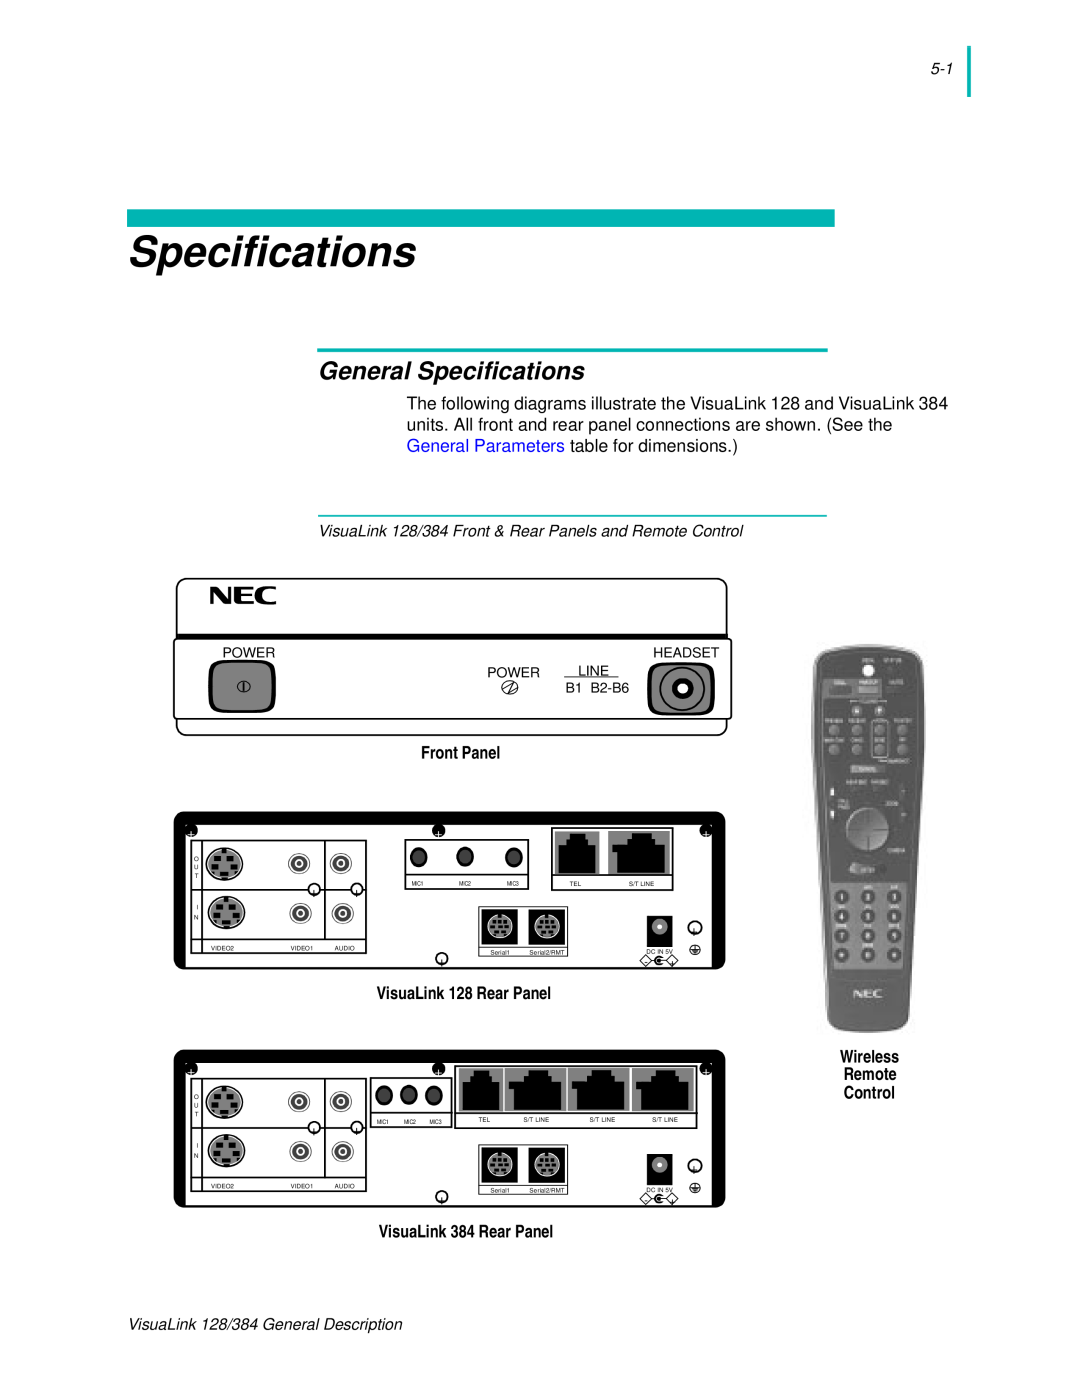 NEC manual General Specifications, Front Panel, VisuaLink 128 Rear Panel, VisuaLink 384 Rear Panel, Power, Headset 